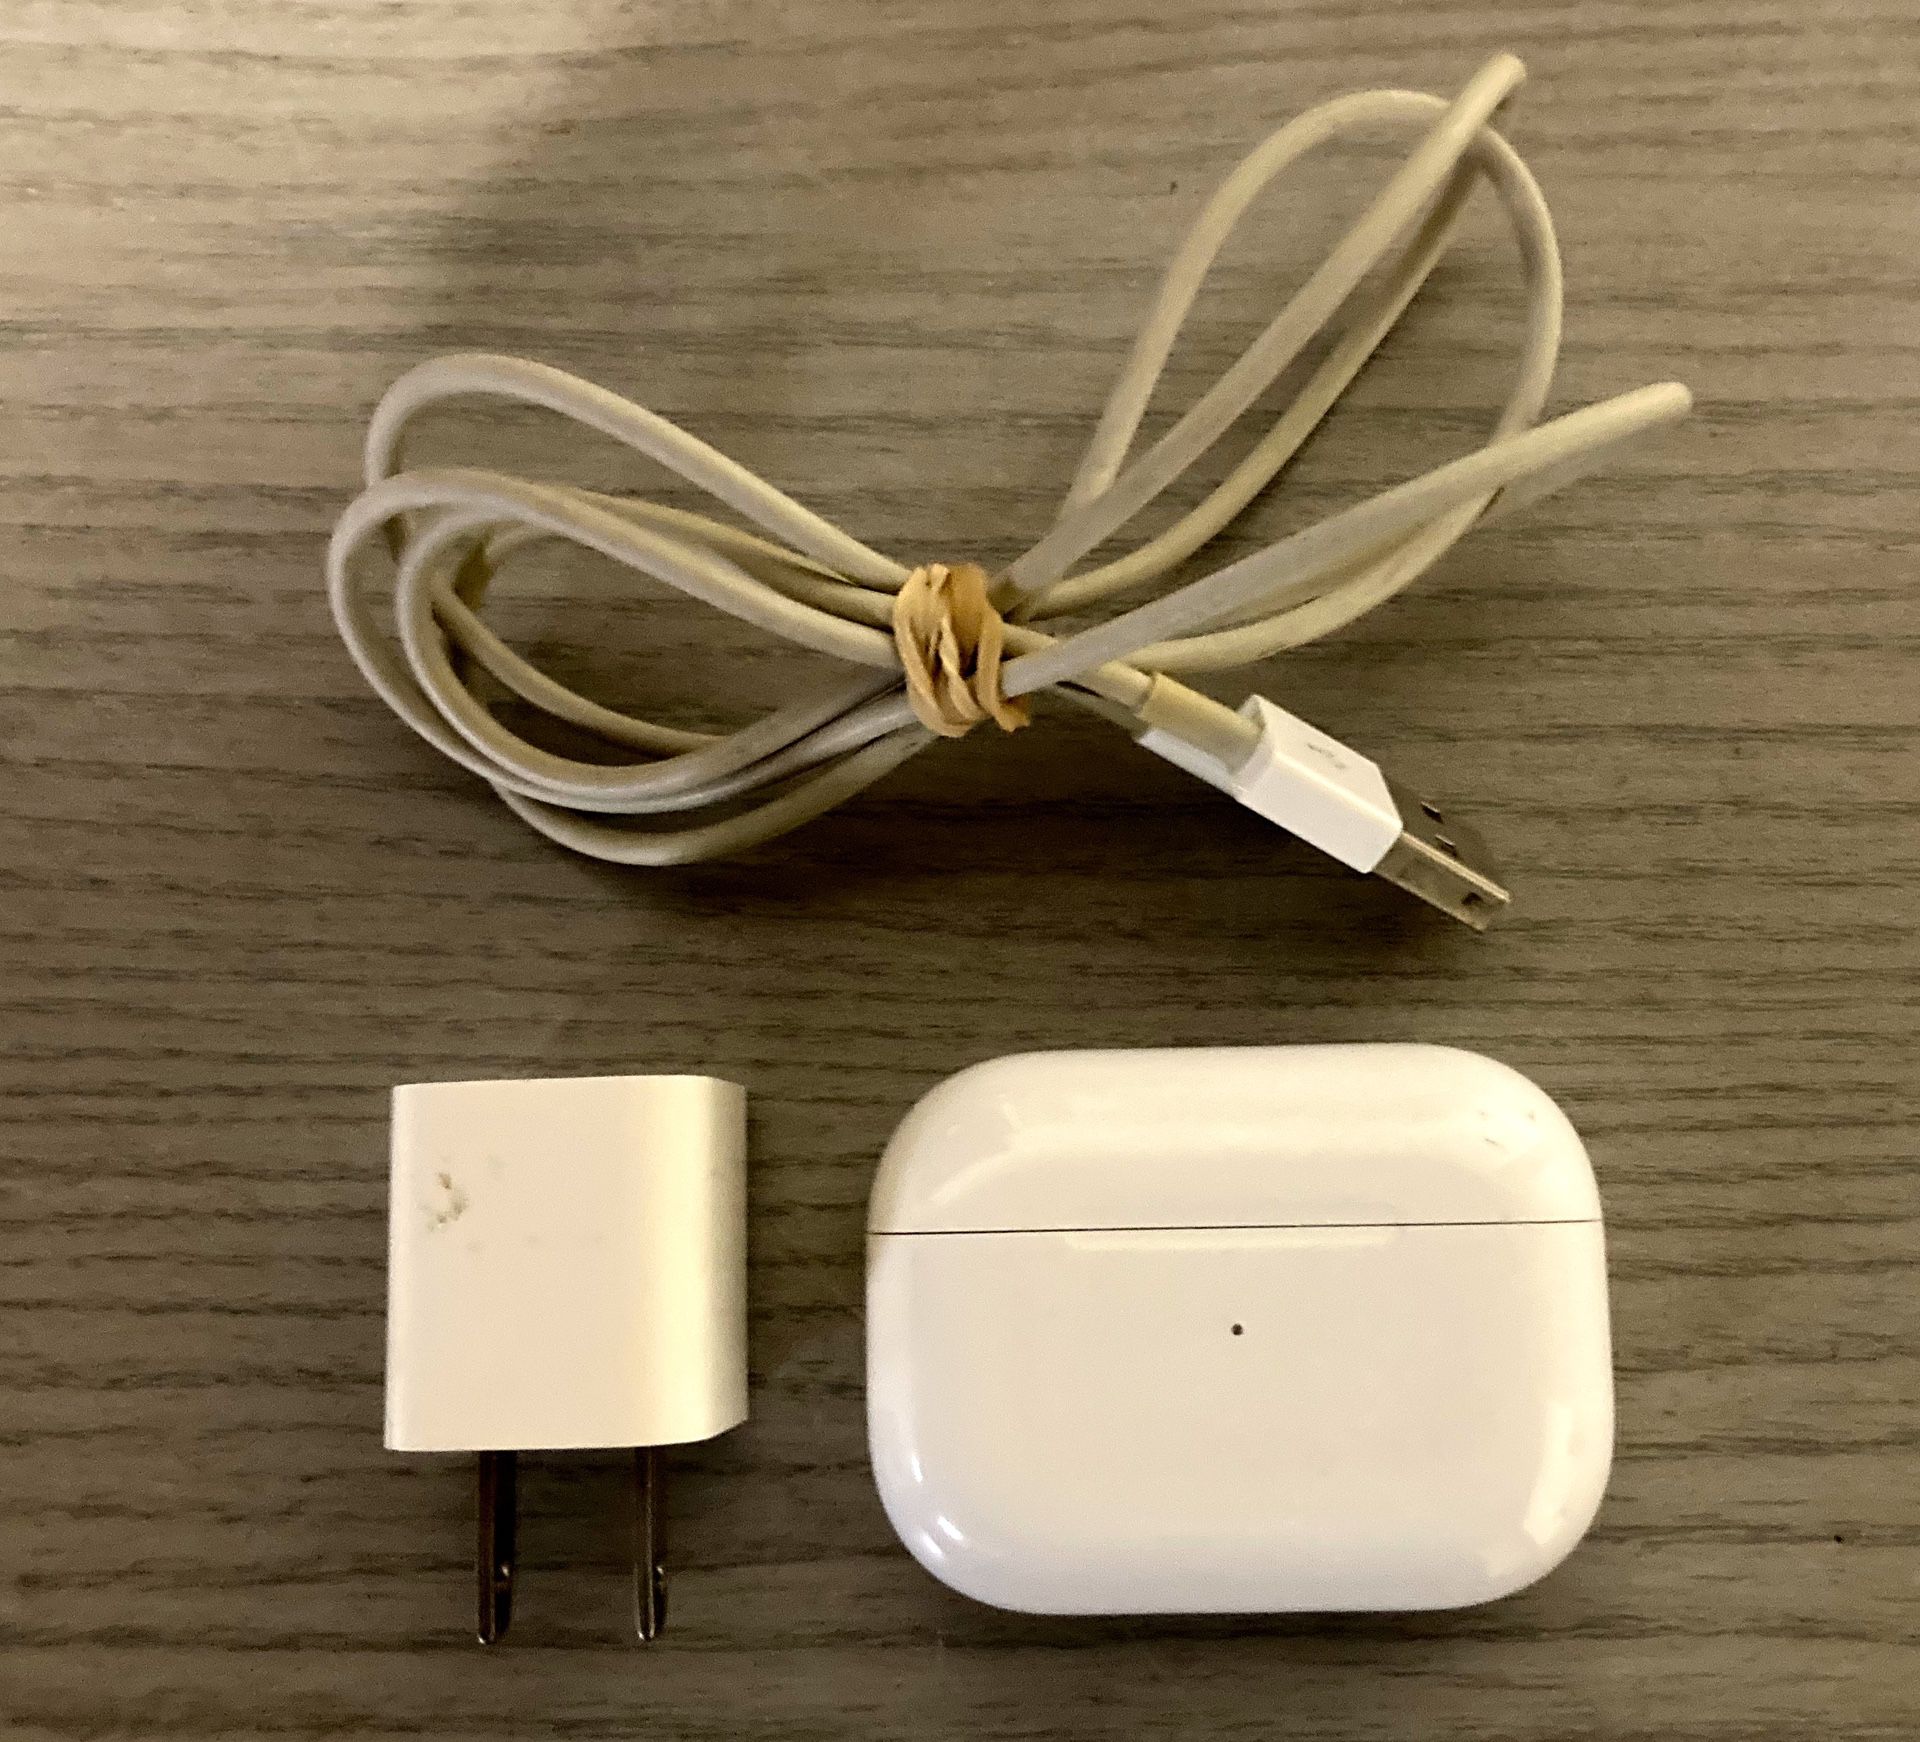 Apple AirPods Pro Charging Case with Charging Cable and Power Adapter 